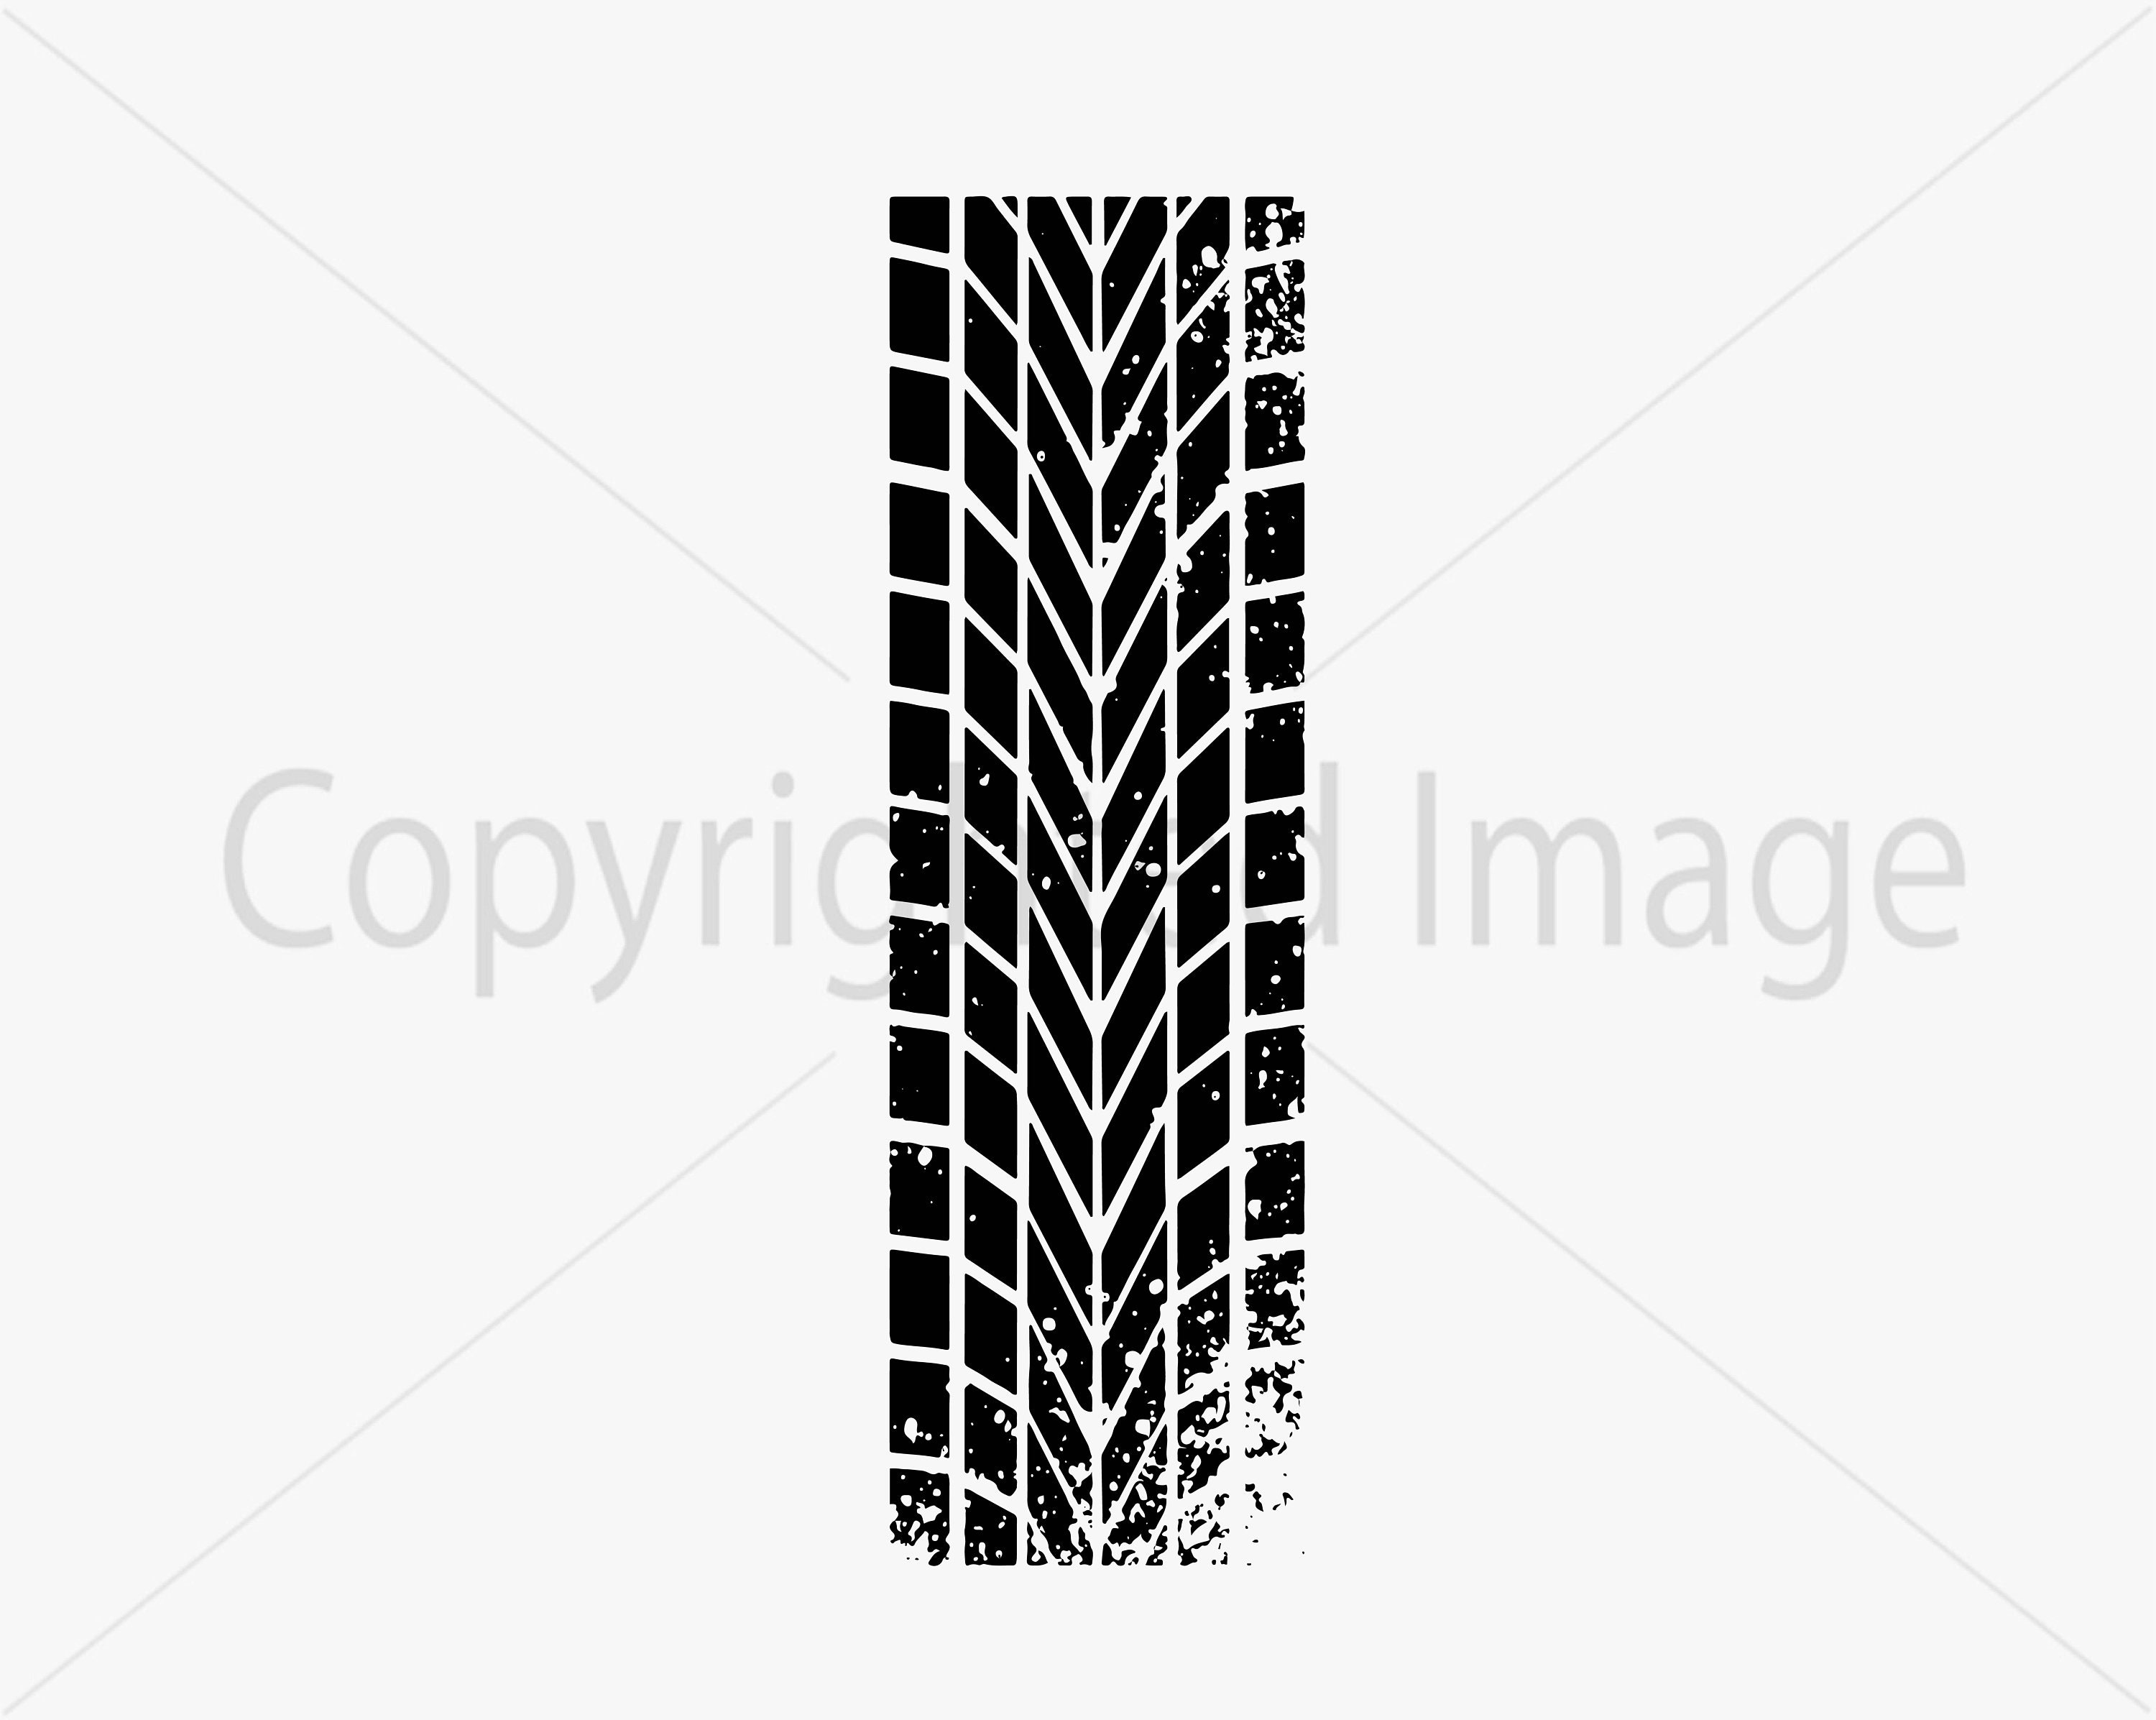 Racing Tire Tracks Sublimation Patches PNG, Distressed Tire Tracks Patches,  Sublimation PNG Patches, Tire Tracks, Dirt Track Racing